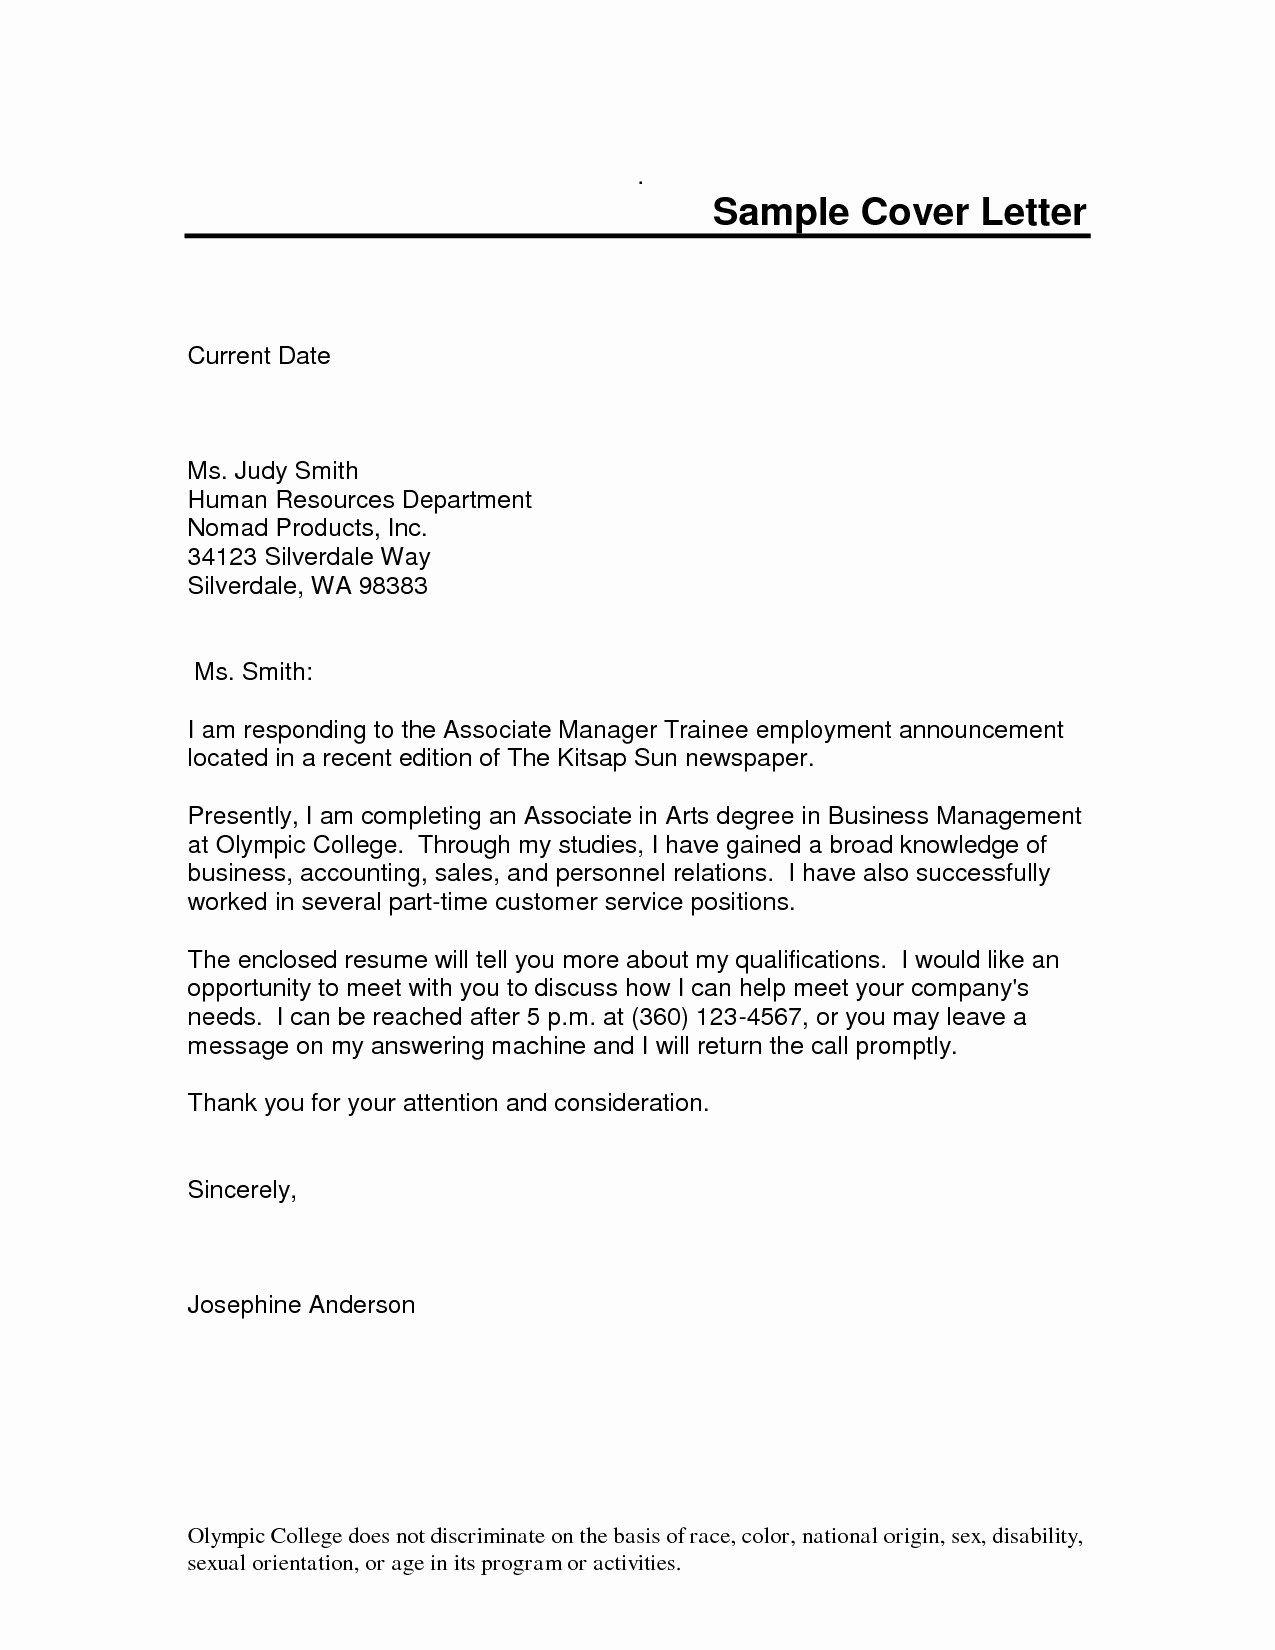 Letter Template for Microsoft Word Lovely Letter Template Word